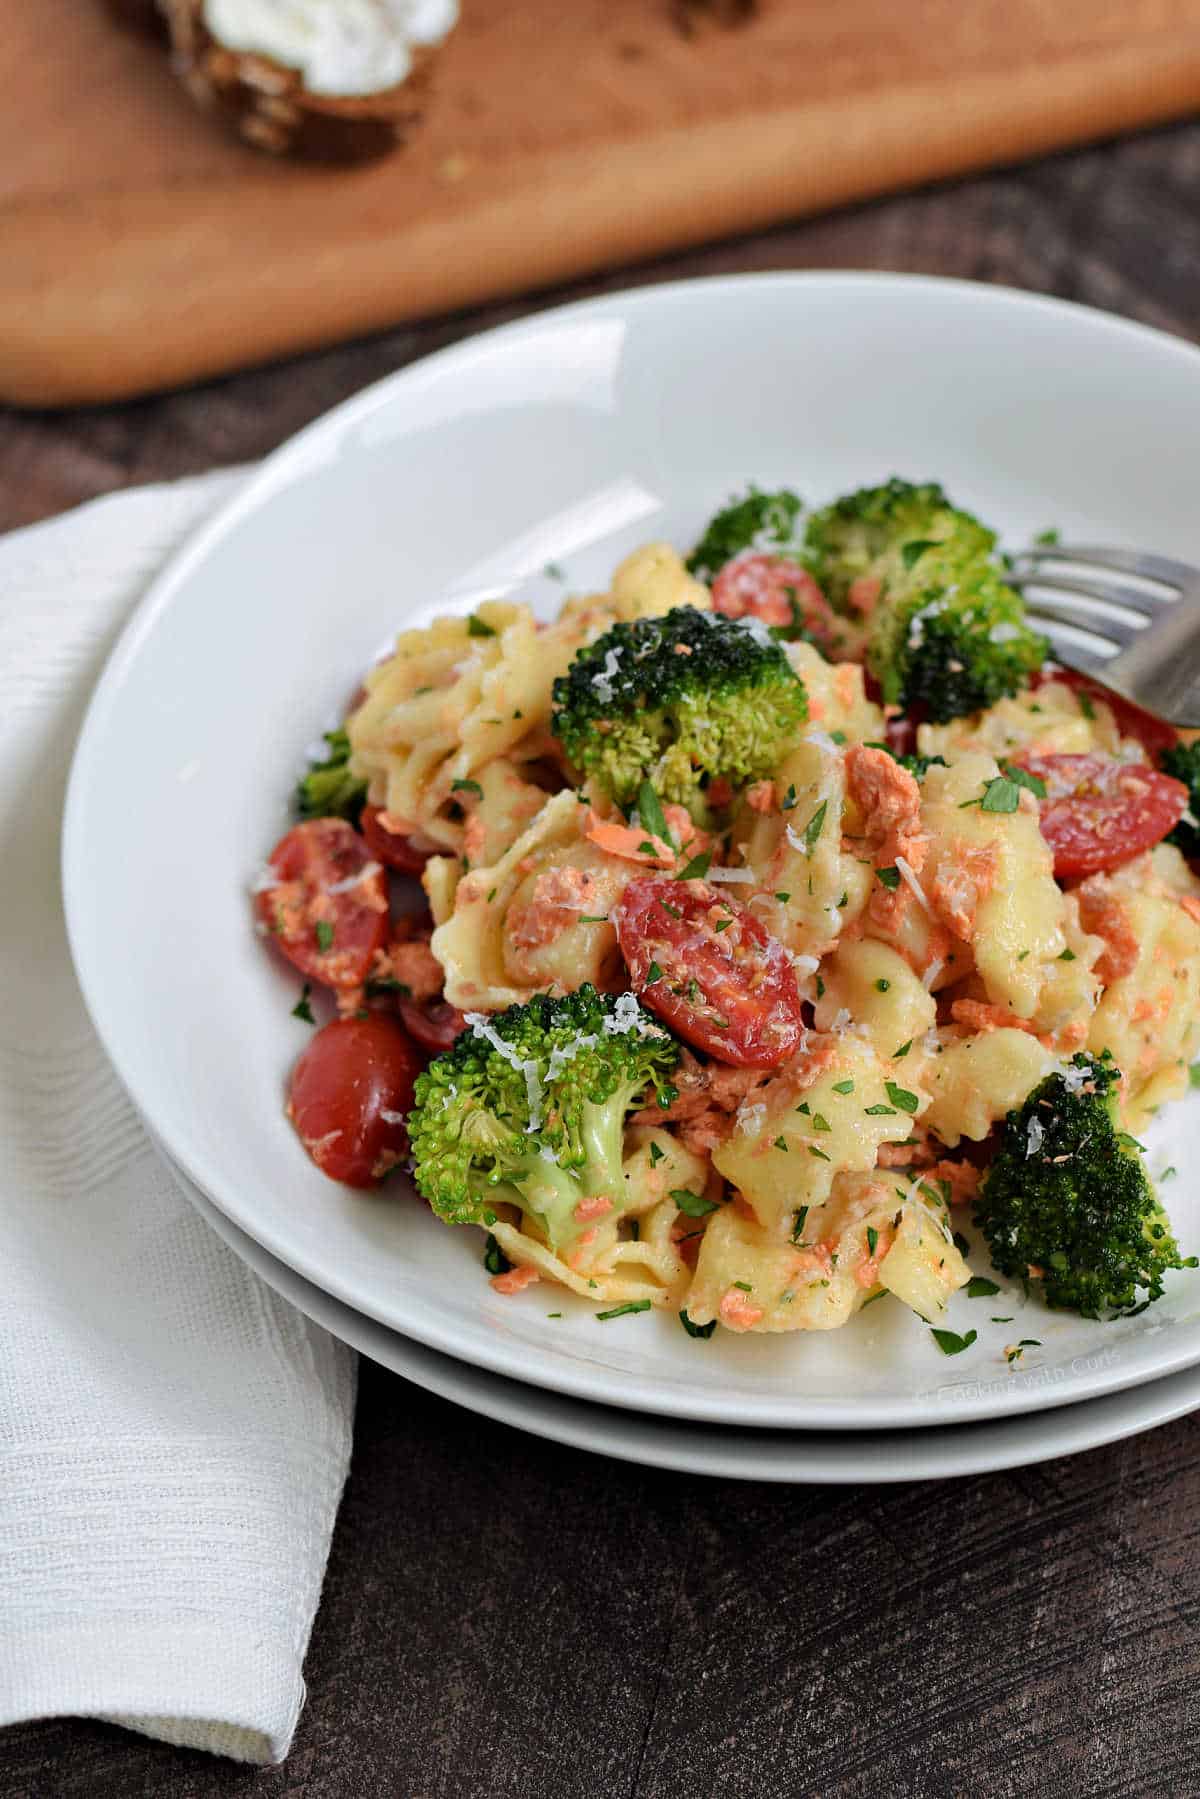 Tortellini, flaked salmon, broccoli florets and cherry tomatoes in a bowl.